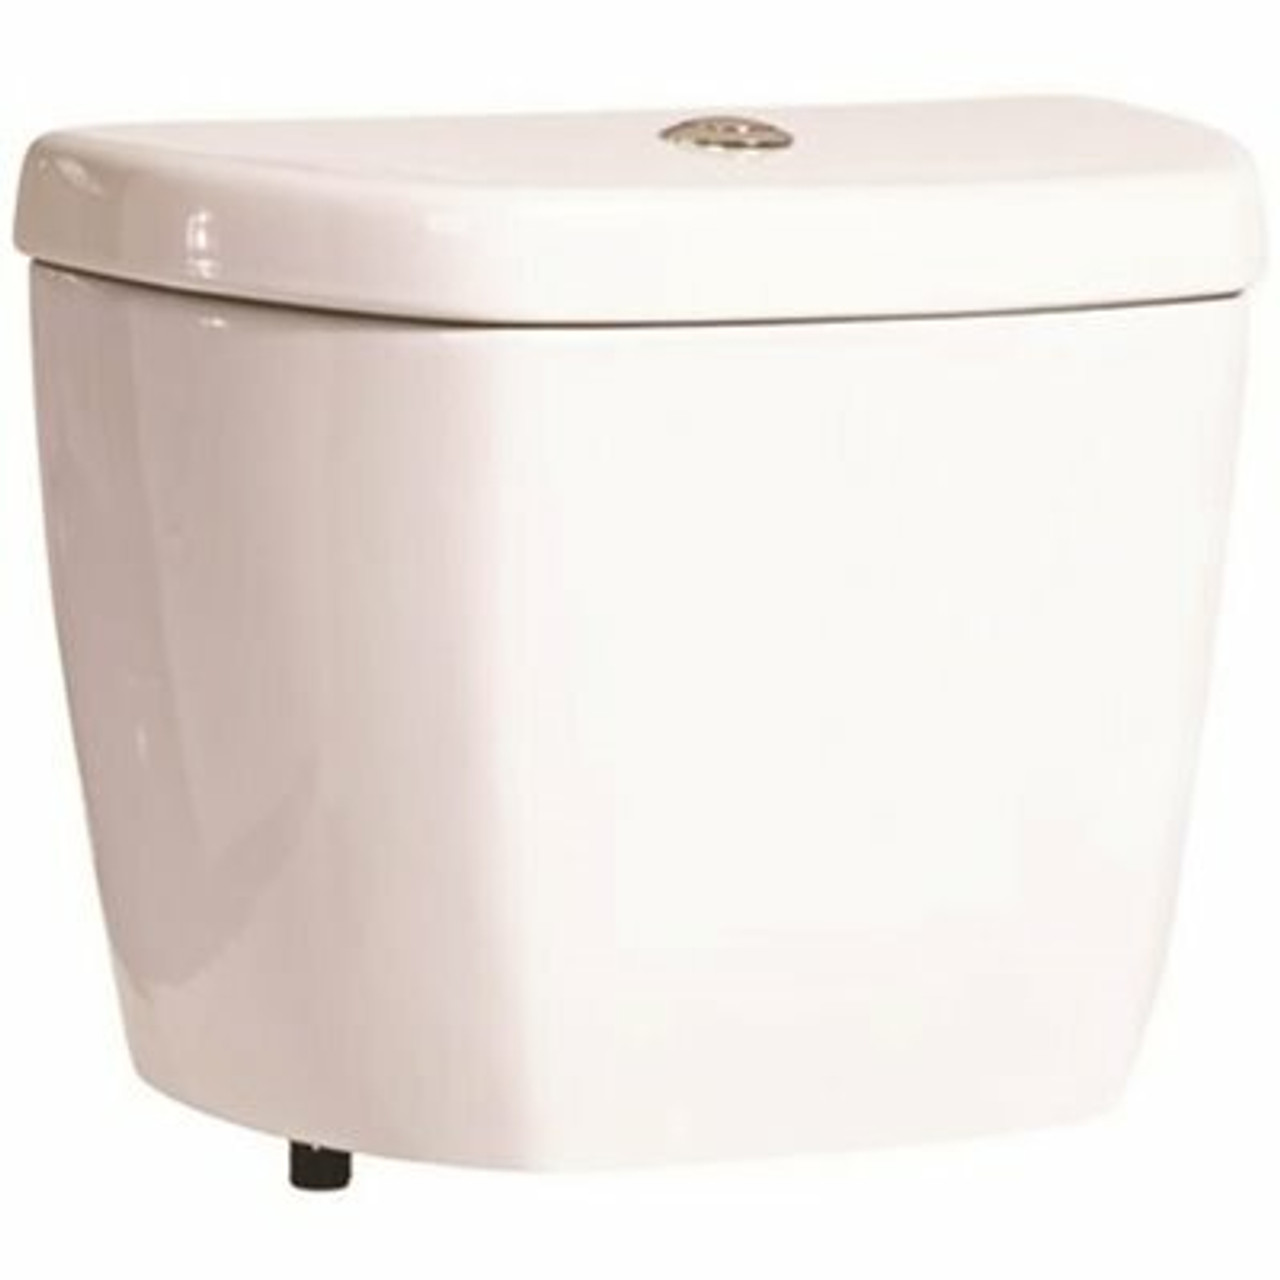 KIT ORDERS ONLY - NOT FOR INDIVIDUAL SALE - Niagara Stealth 0.8 GPF Single Flush Toilet Tank Only in White